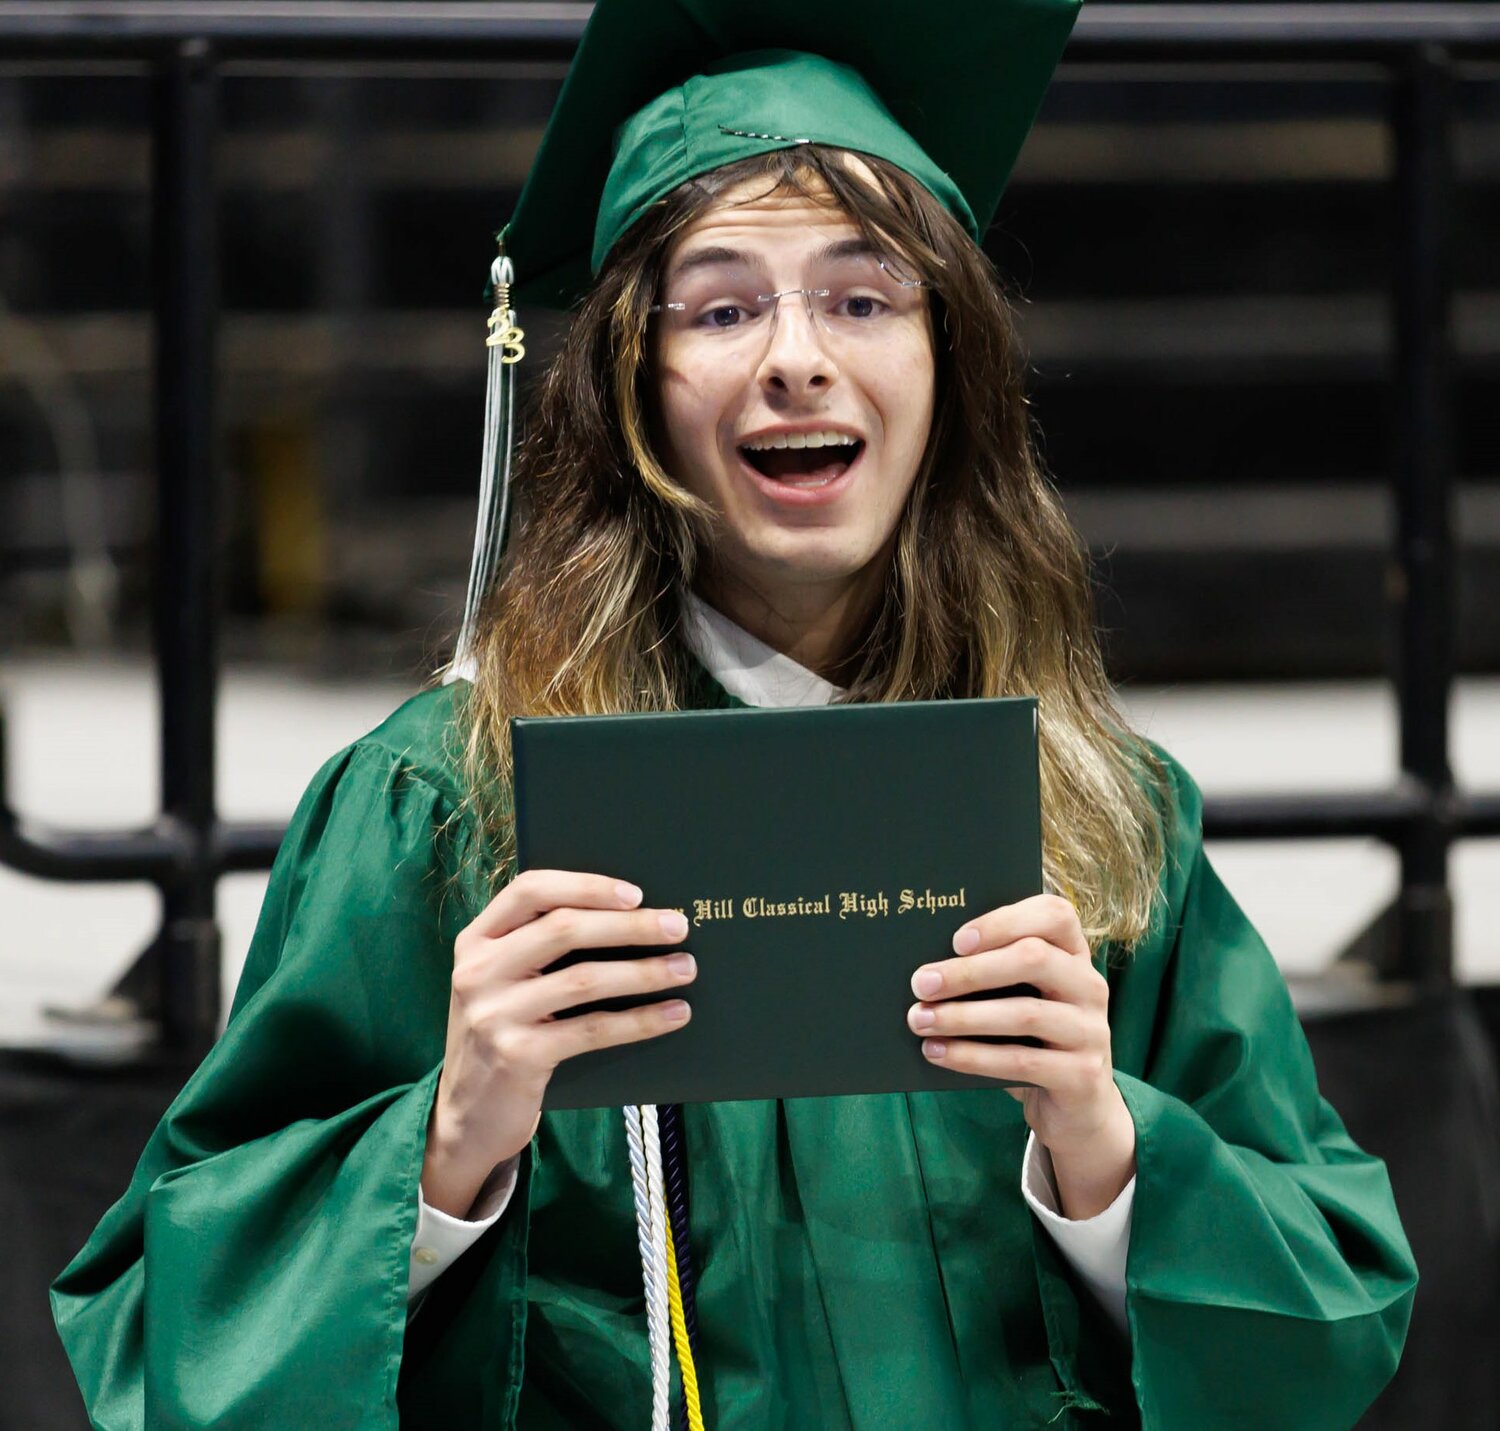 A student shows off his diploma at the 2023 commencement for Massey Hill Classical High School on Tuesday at the Crown Coliseum.